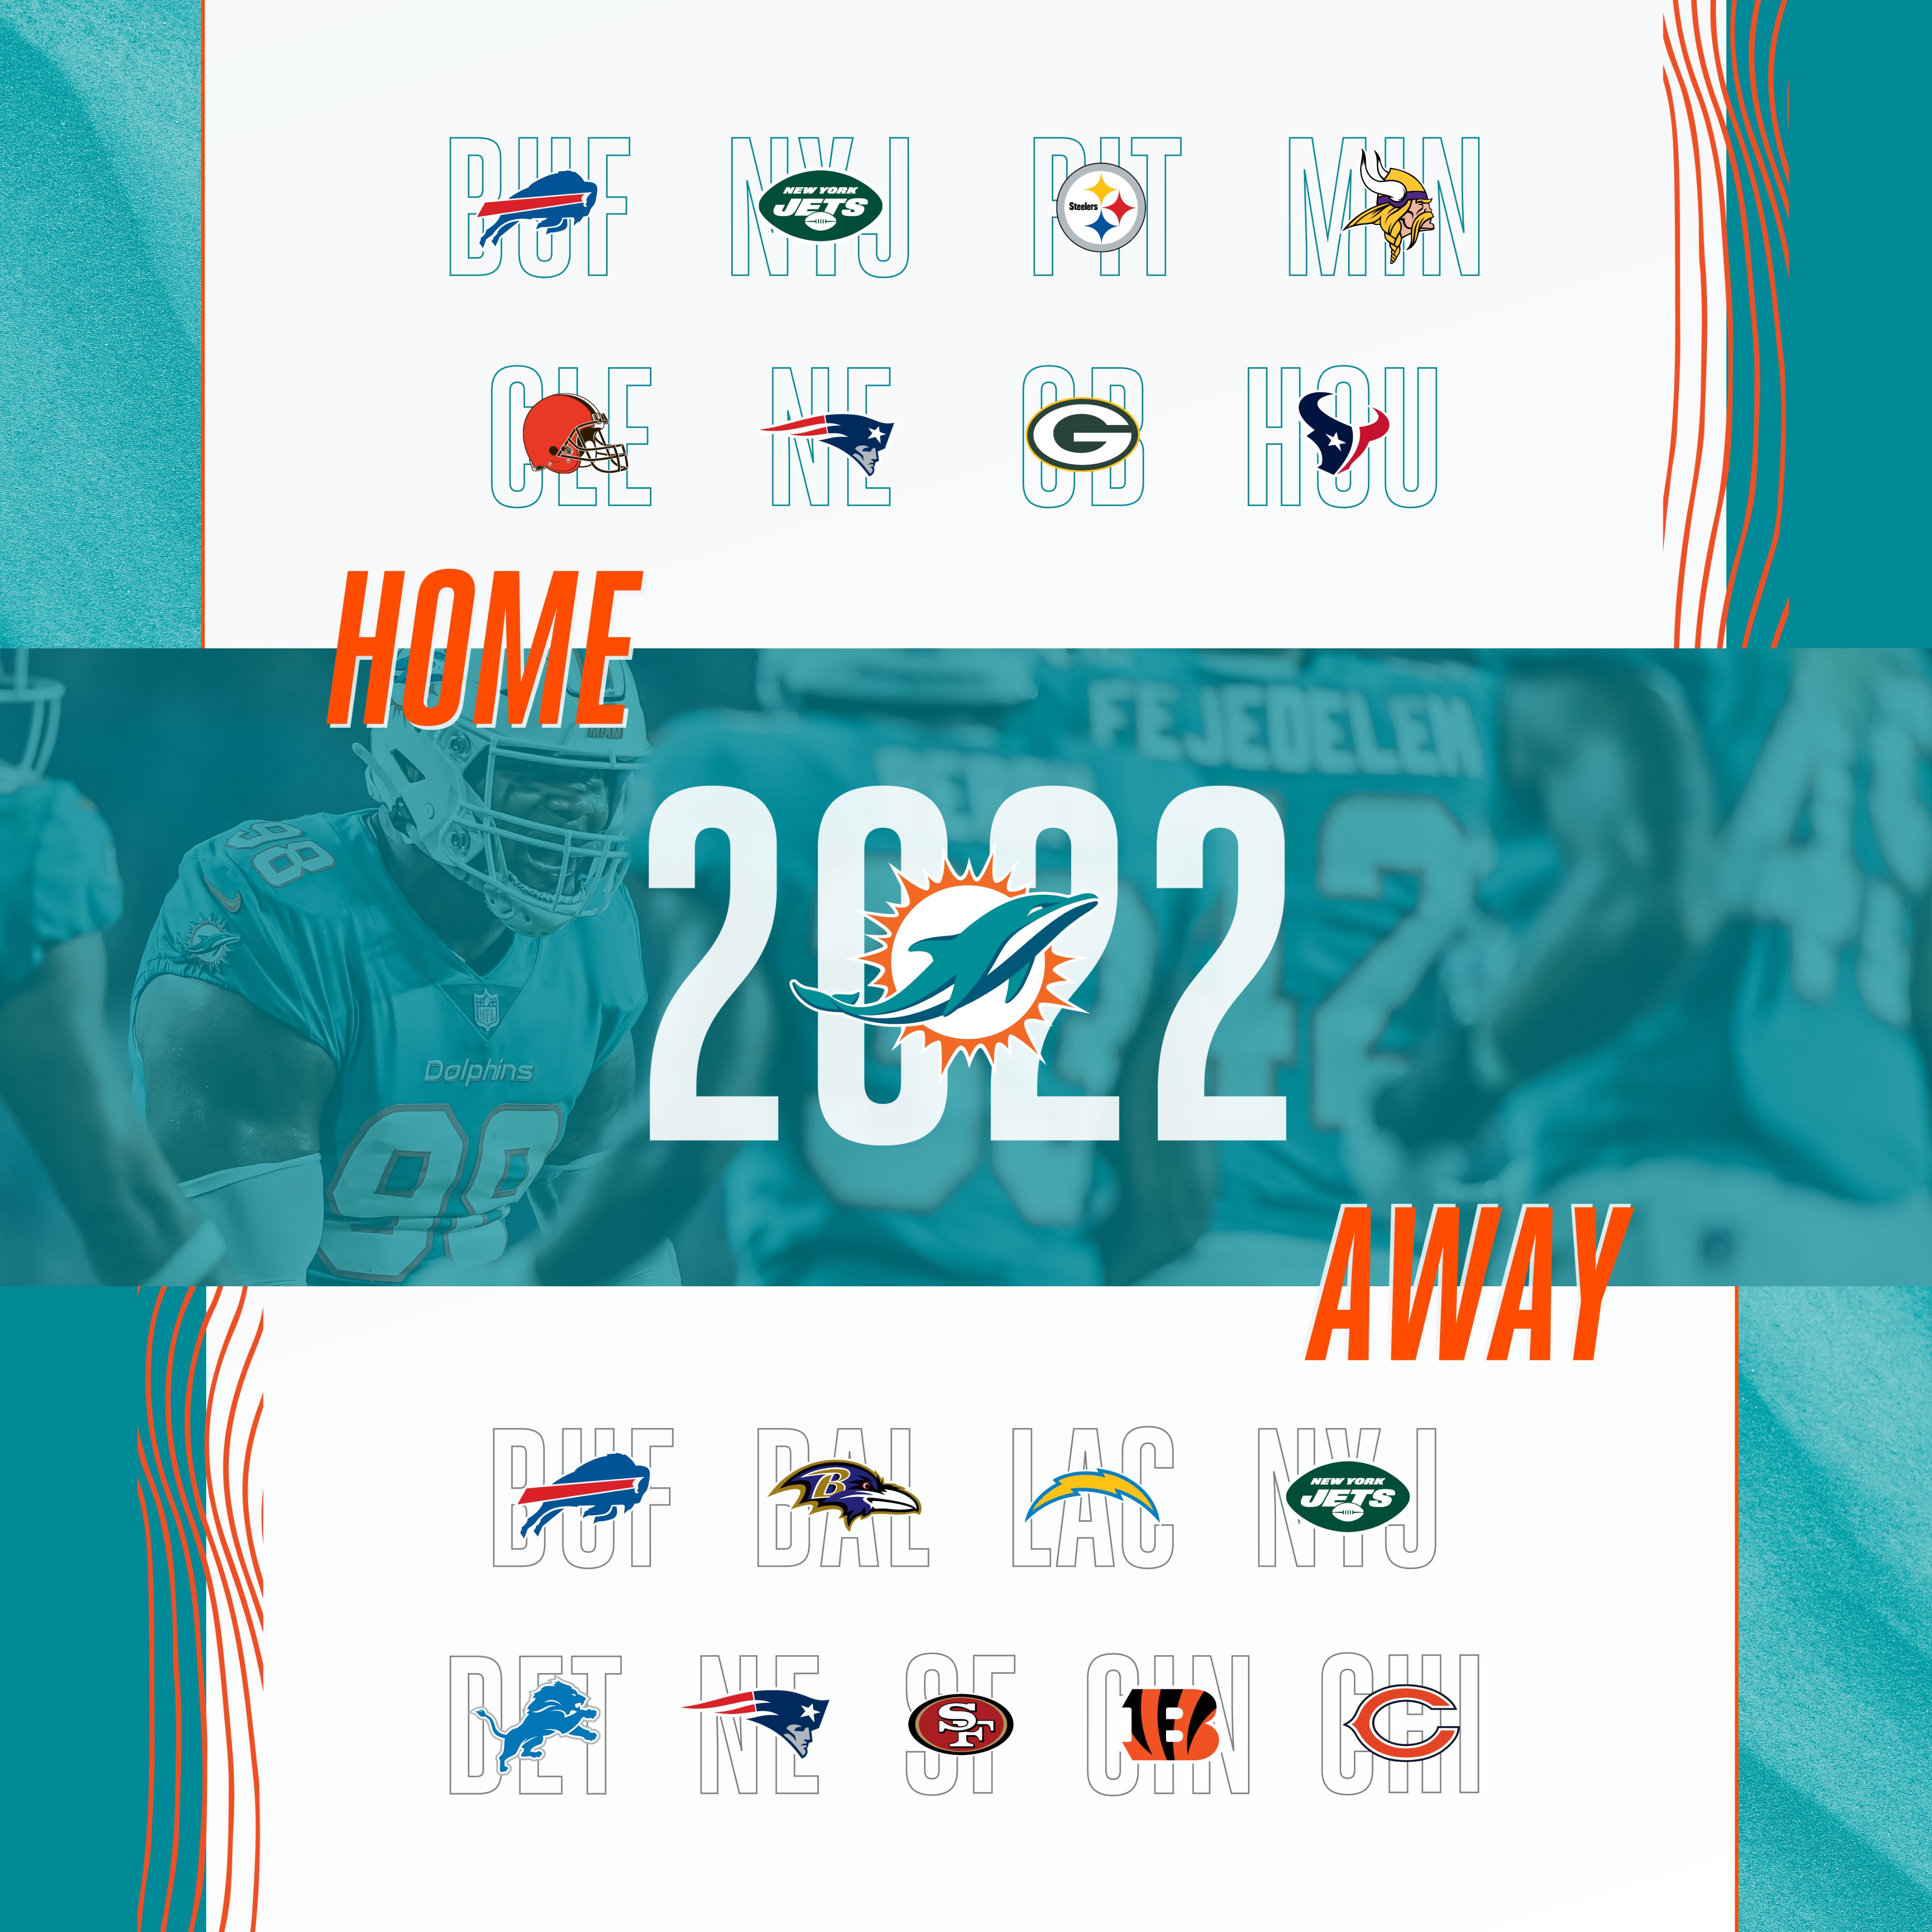 Miami Dolphins on X: Get those calendars ready. The 2️⃣0️⃣2️⃣2️⃣ schedule  is being released at 8:00 pm tomorrow 